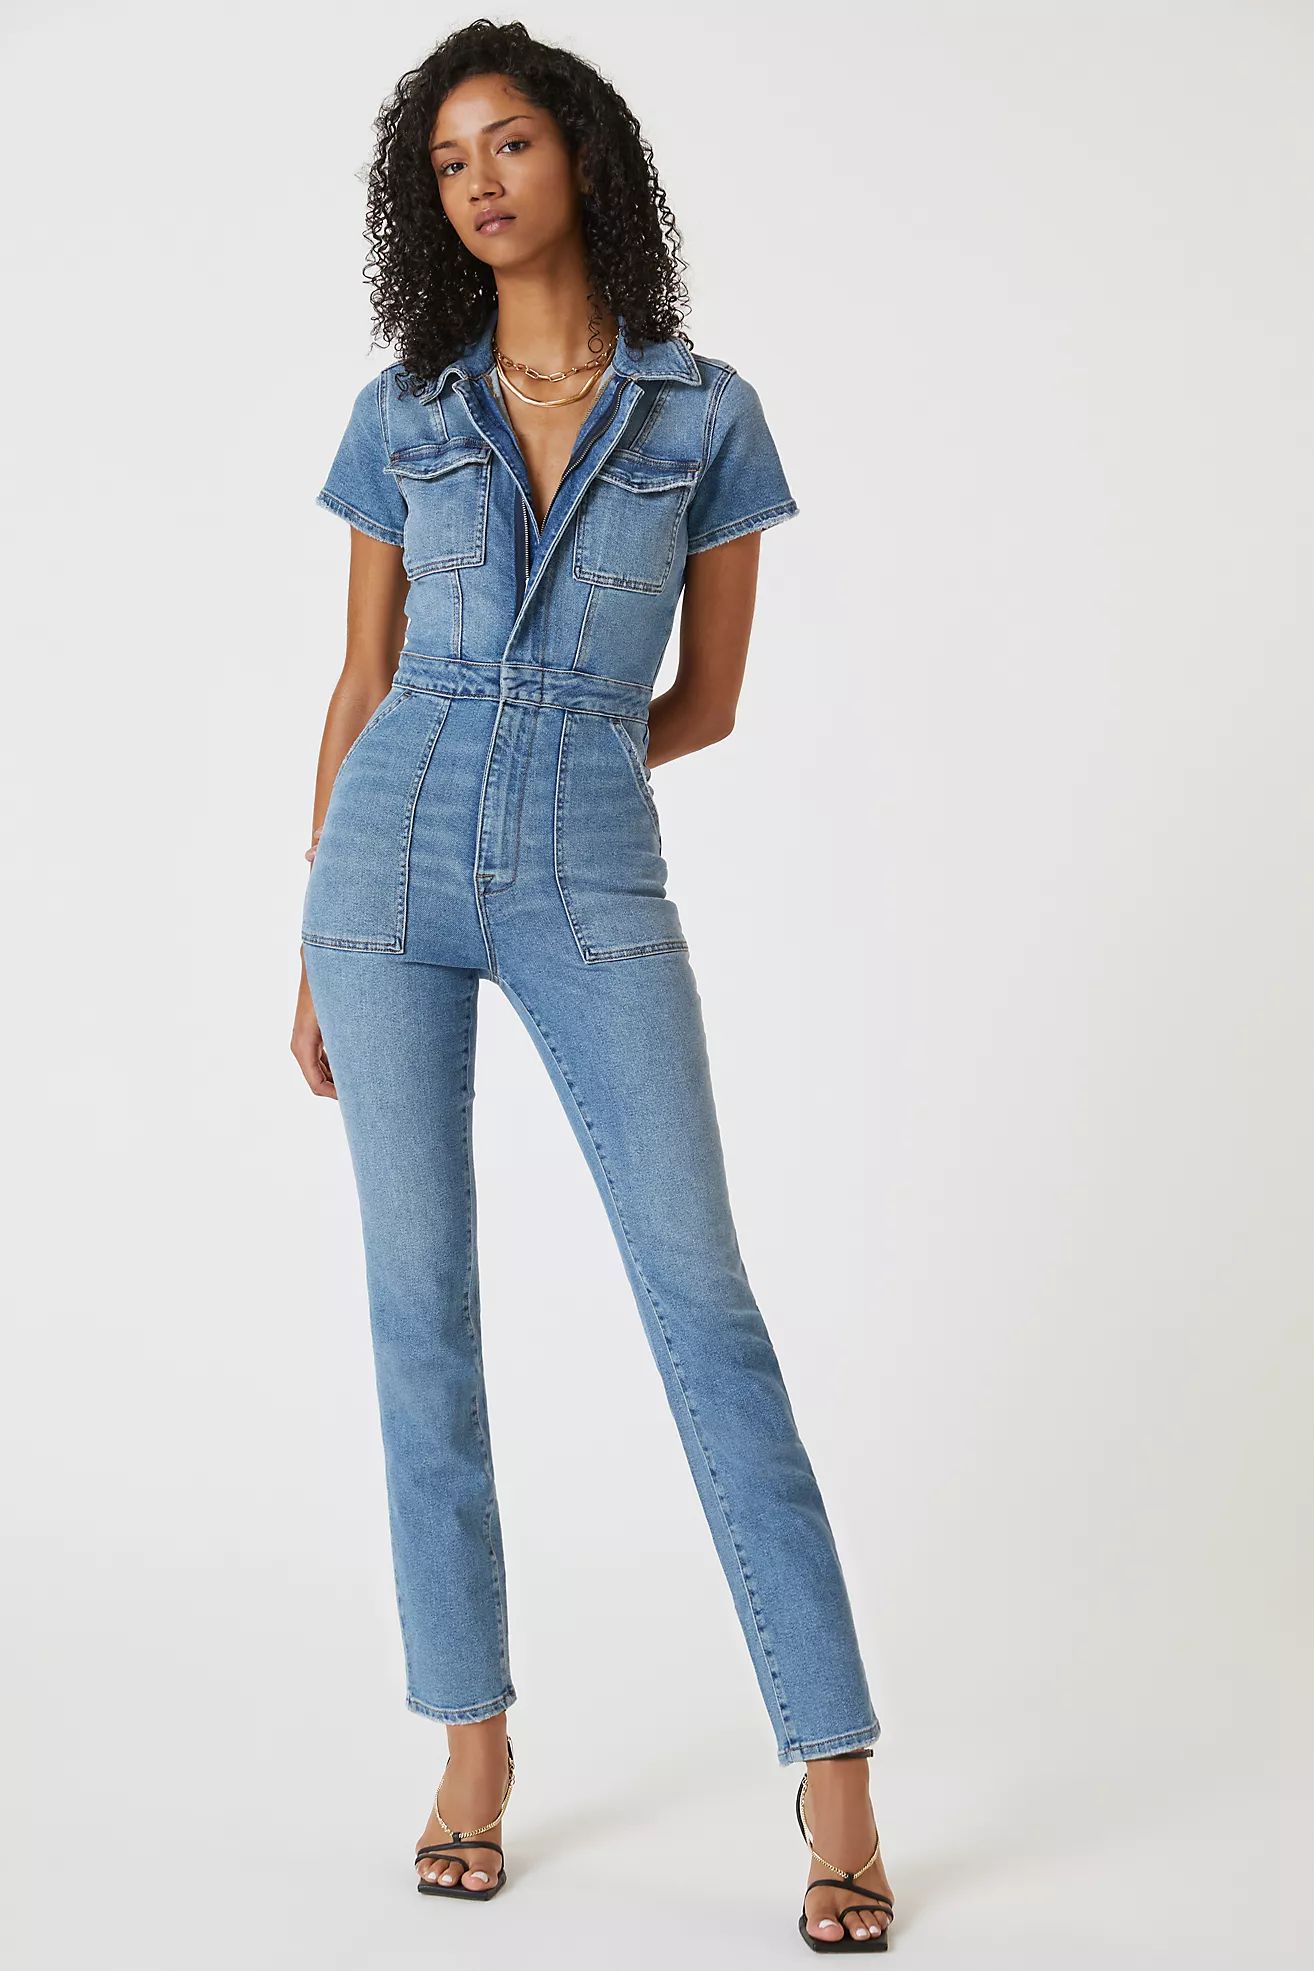 Good American Fit For Success Jumpsuit | Anthropologie (US)